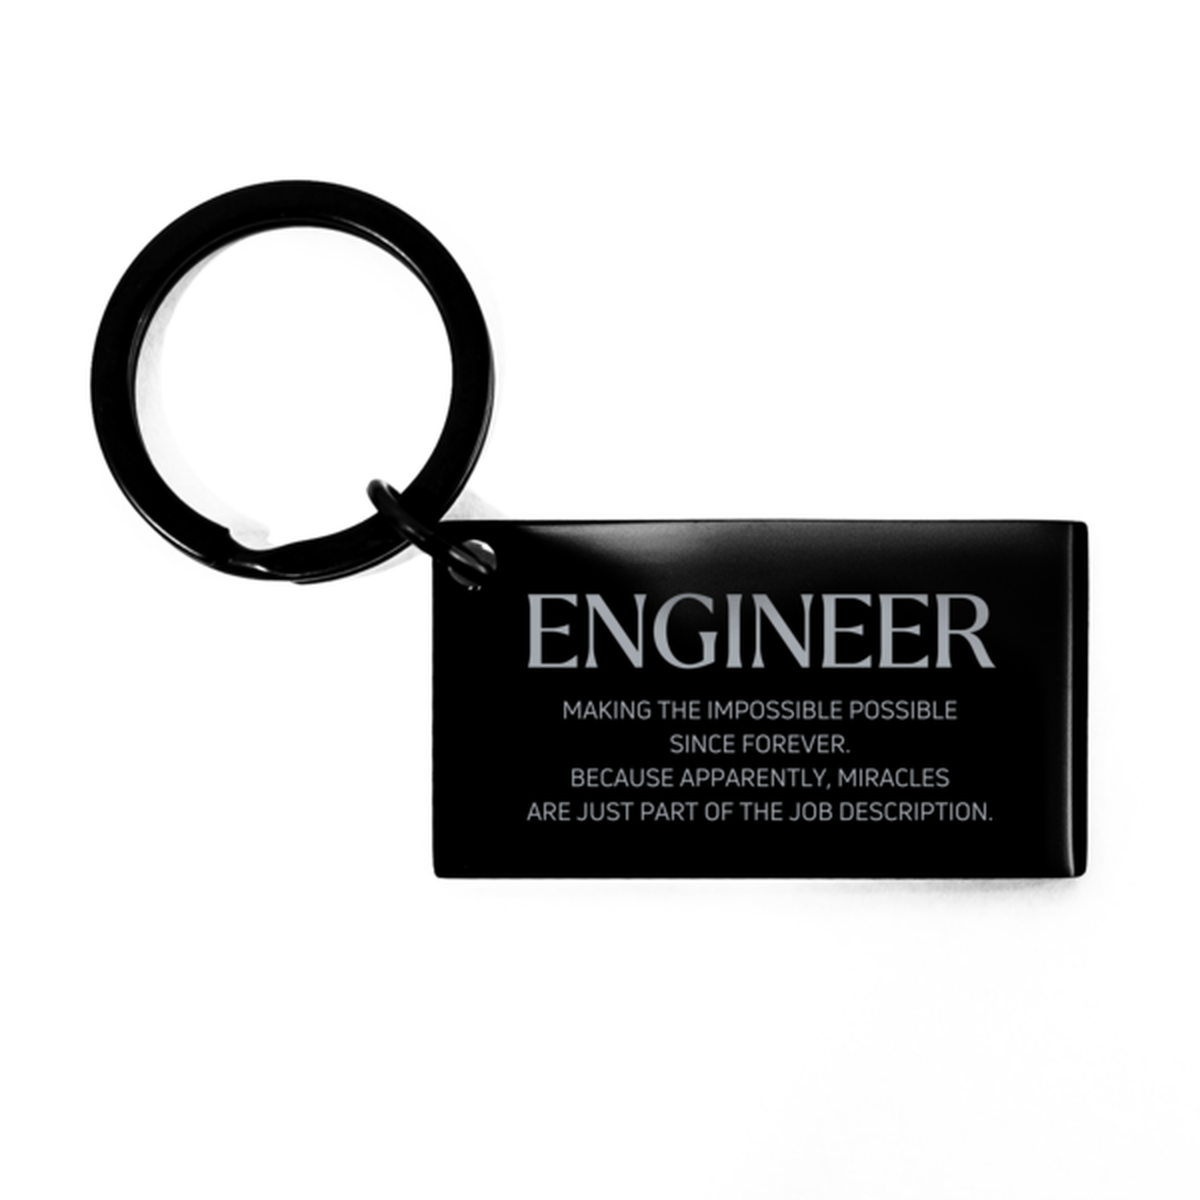 Funny Engineer Gifts, Miracles are just part of the job description, Inspirational Birthday Keychain For Engineer, Men, Women, Coworkers, Friends, Boss